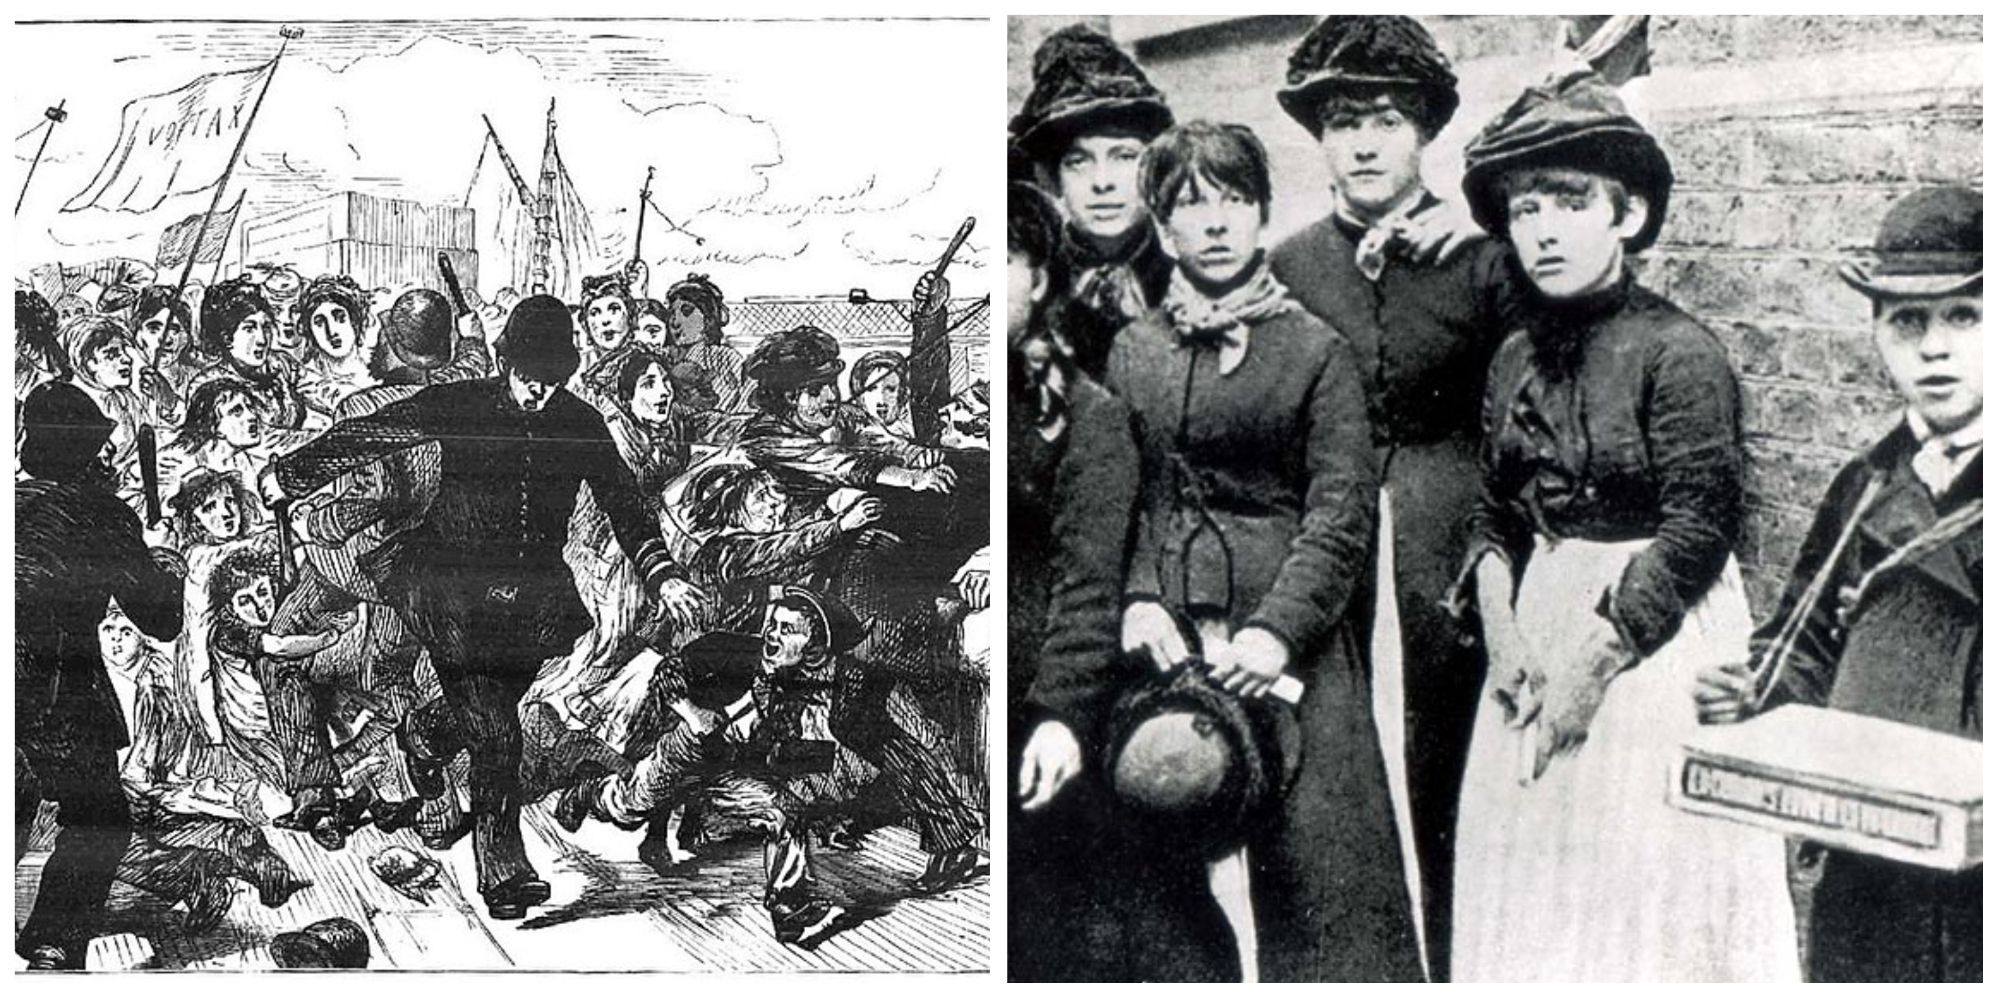 A combined image: illustration of the matchgirls strike/police protest, alongside a black and white image of real-life matchgirls outside of their factory